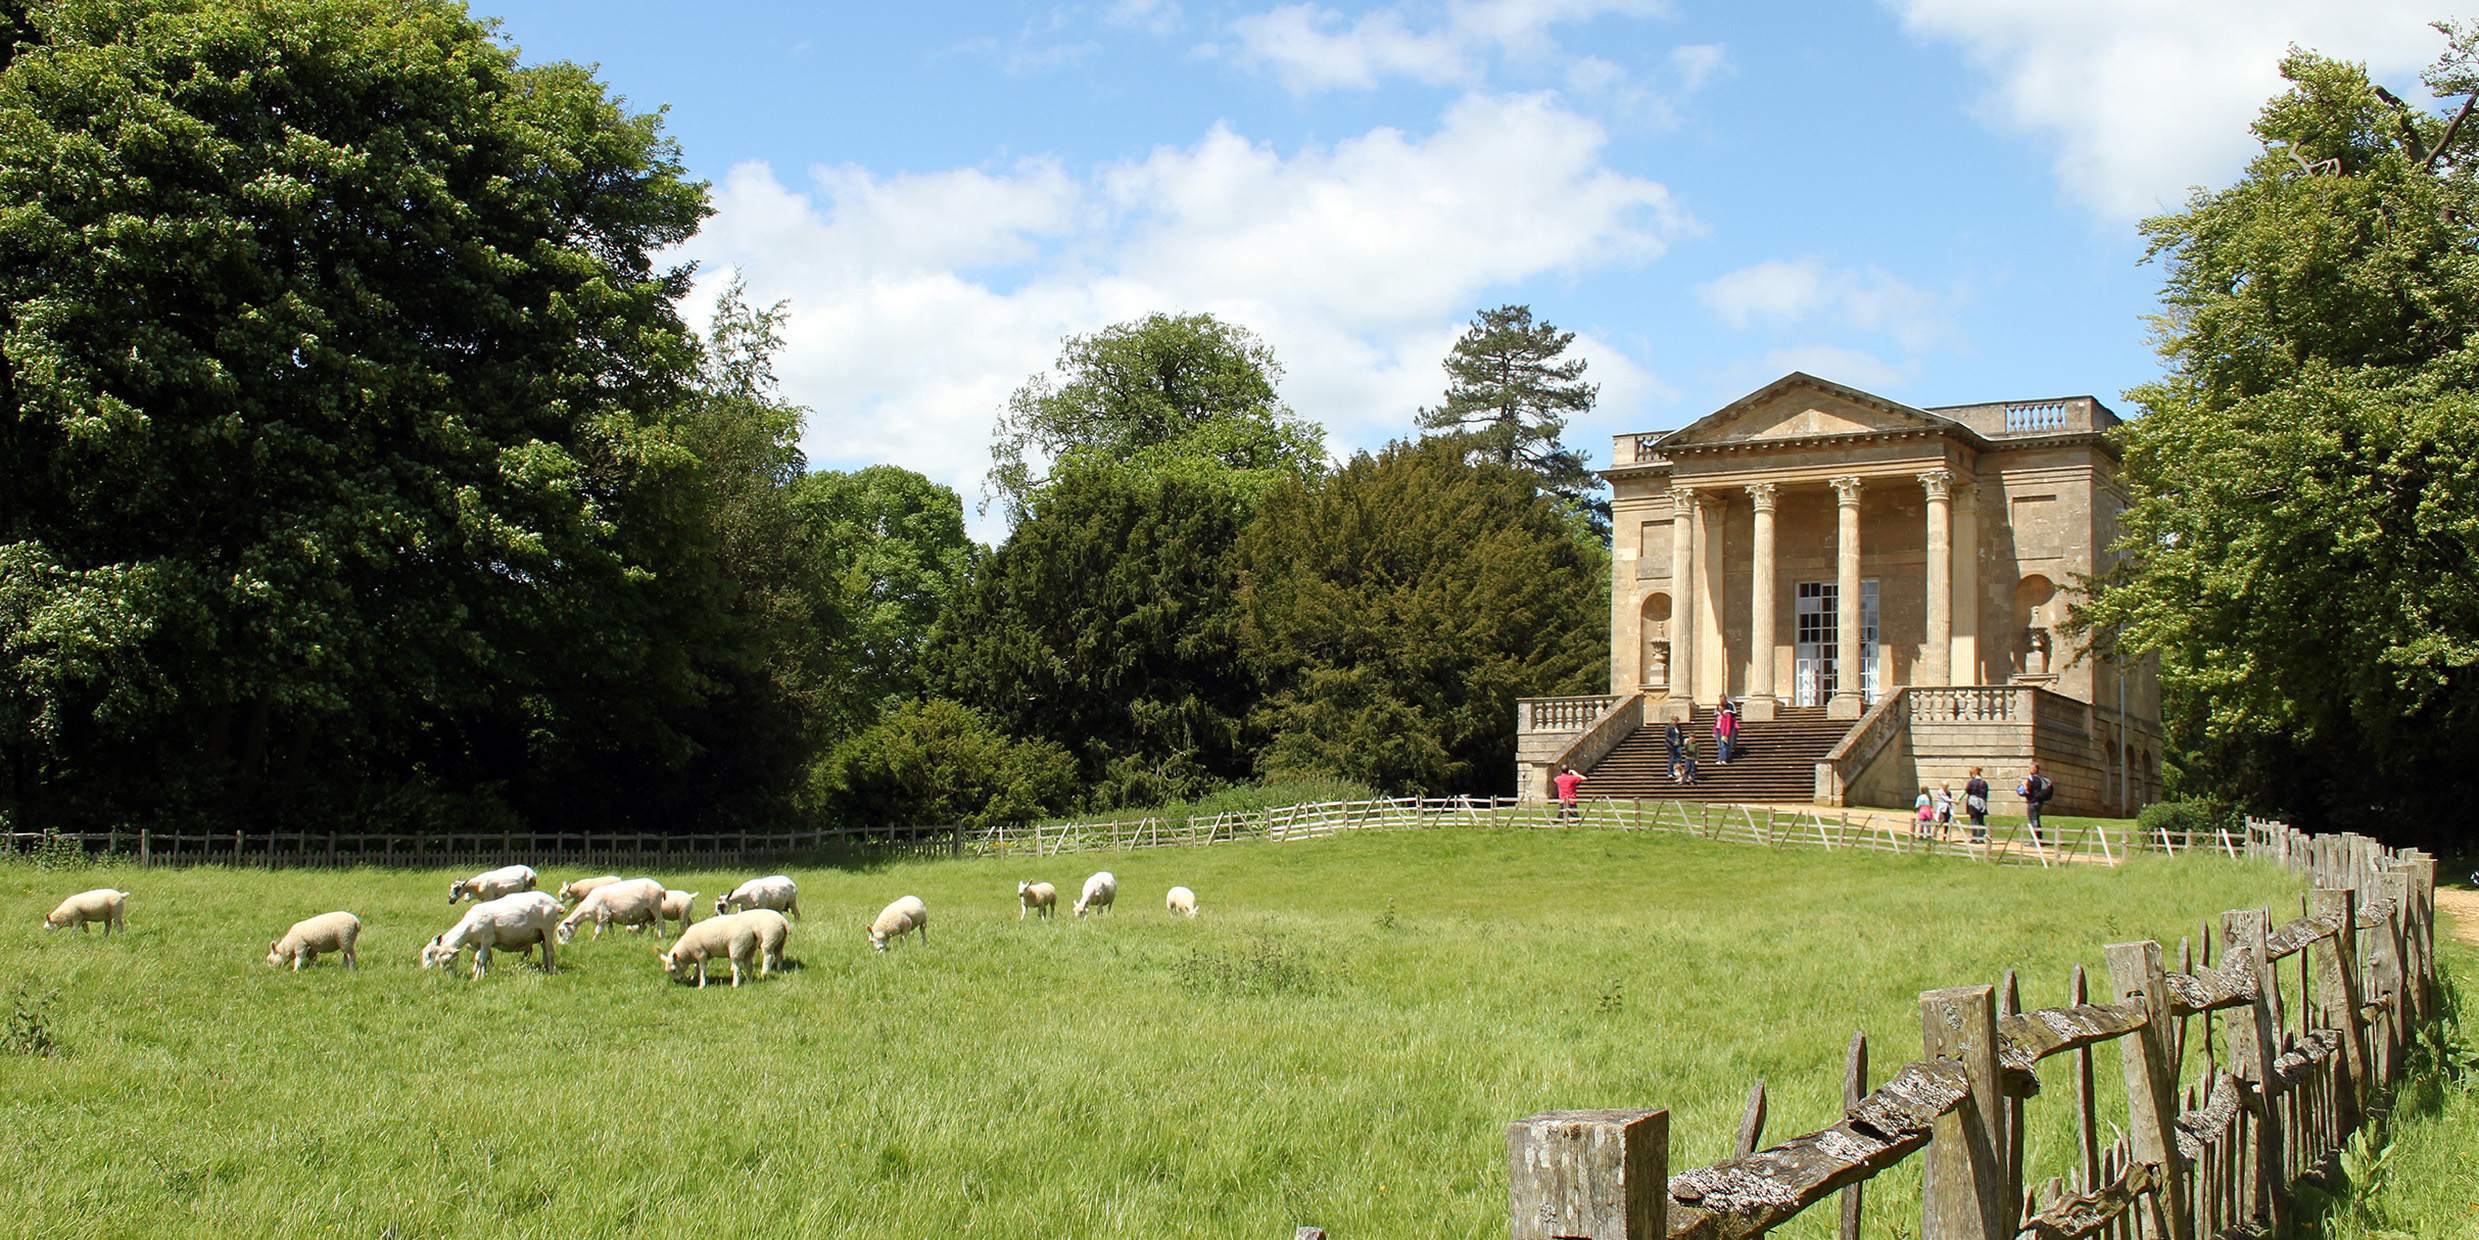 Image of a English landscape garden with a open pasture and a classical-style building